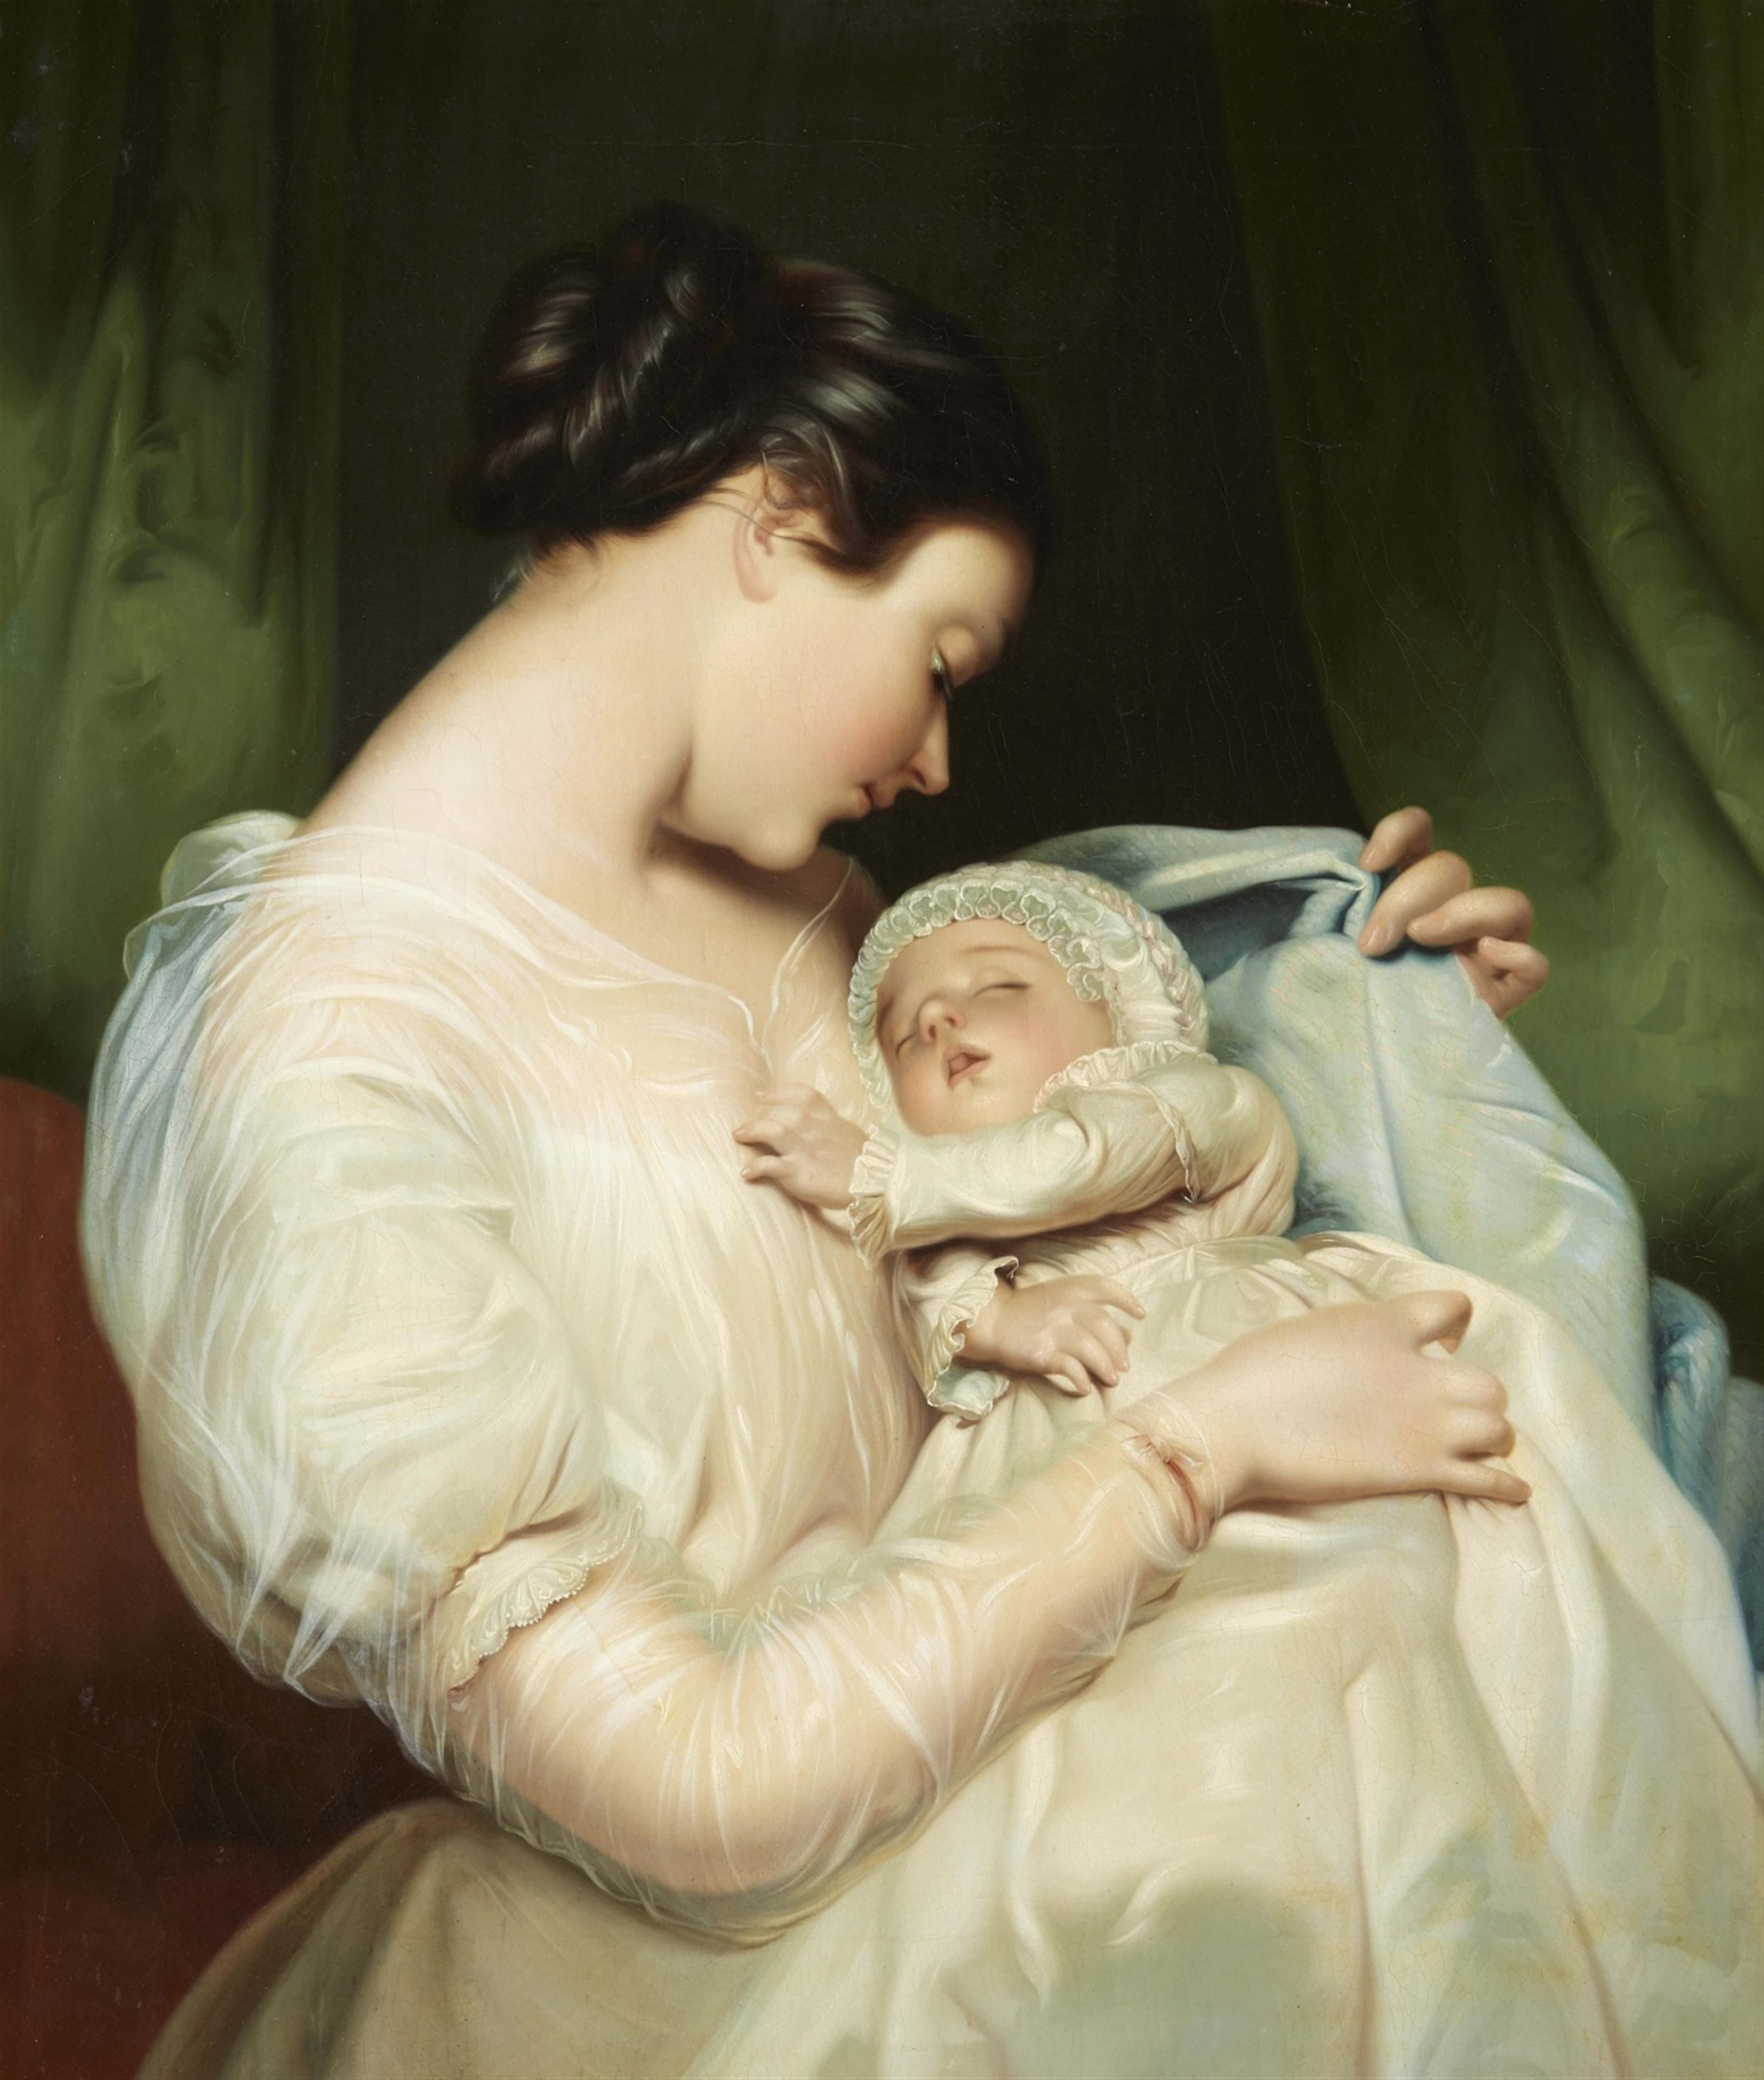 James Sant, attributed to - Elizabeth Sant, Wife of the Artist, with their Daughter Mary Edith - image-1